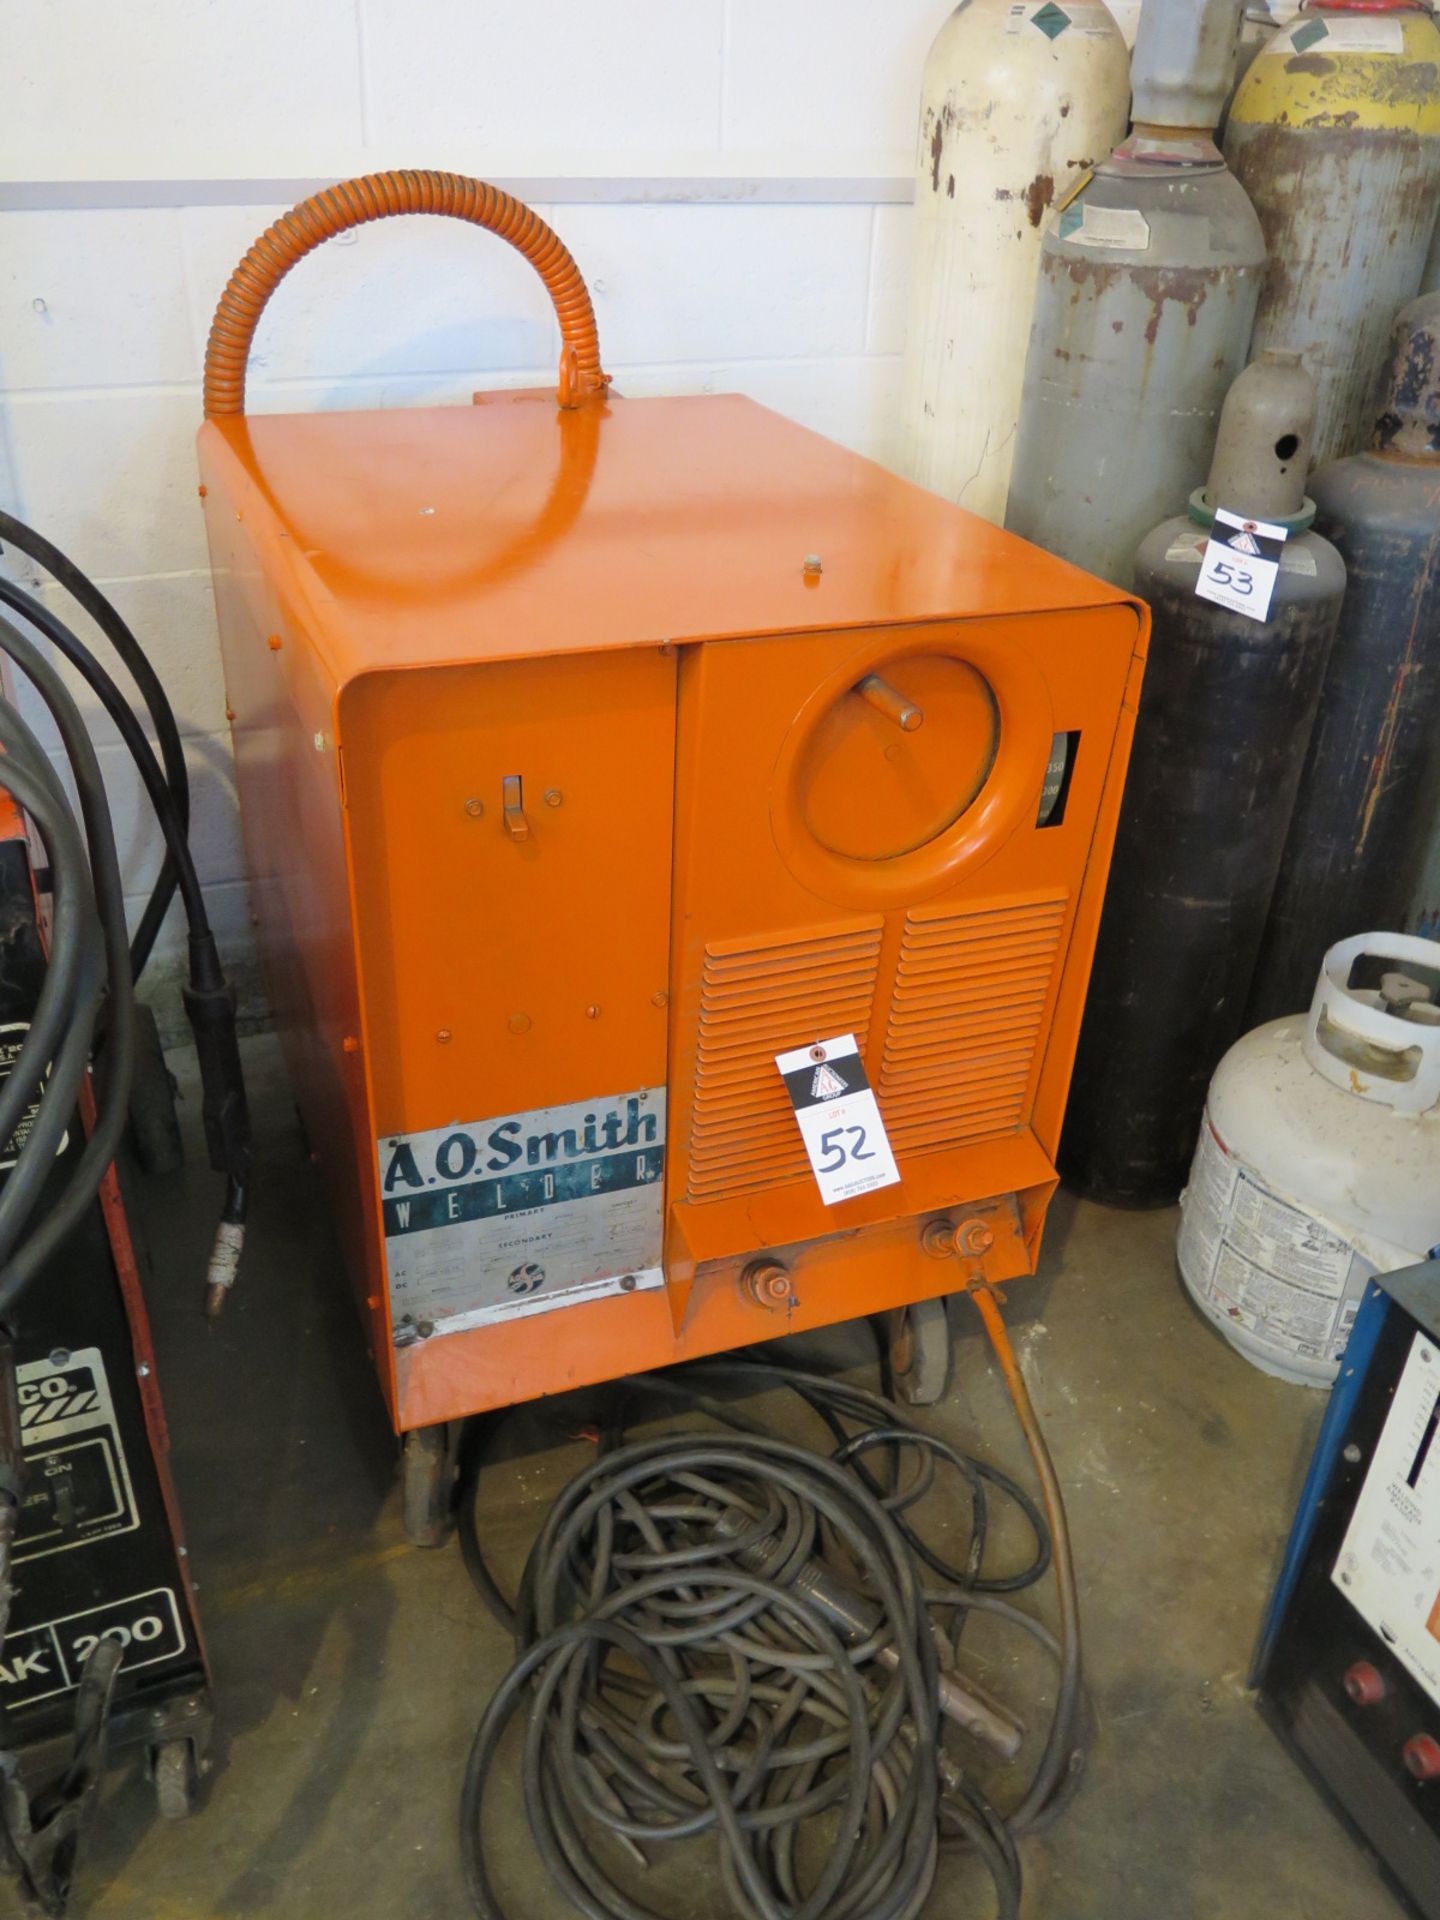 A.O.Smith mdl. A-300L Arc Welding Power Source s/n 033-6102-11 - Image 2 of 2